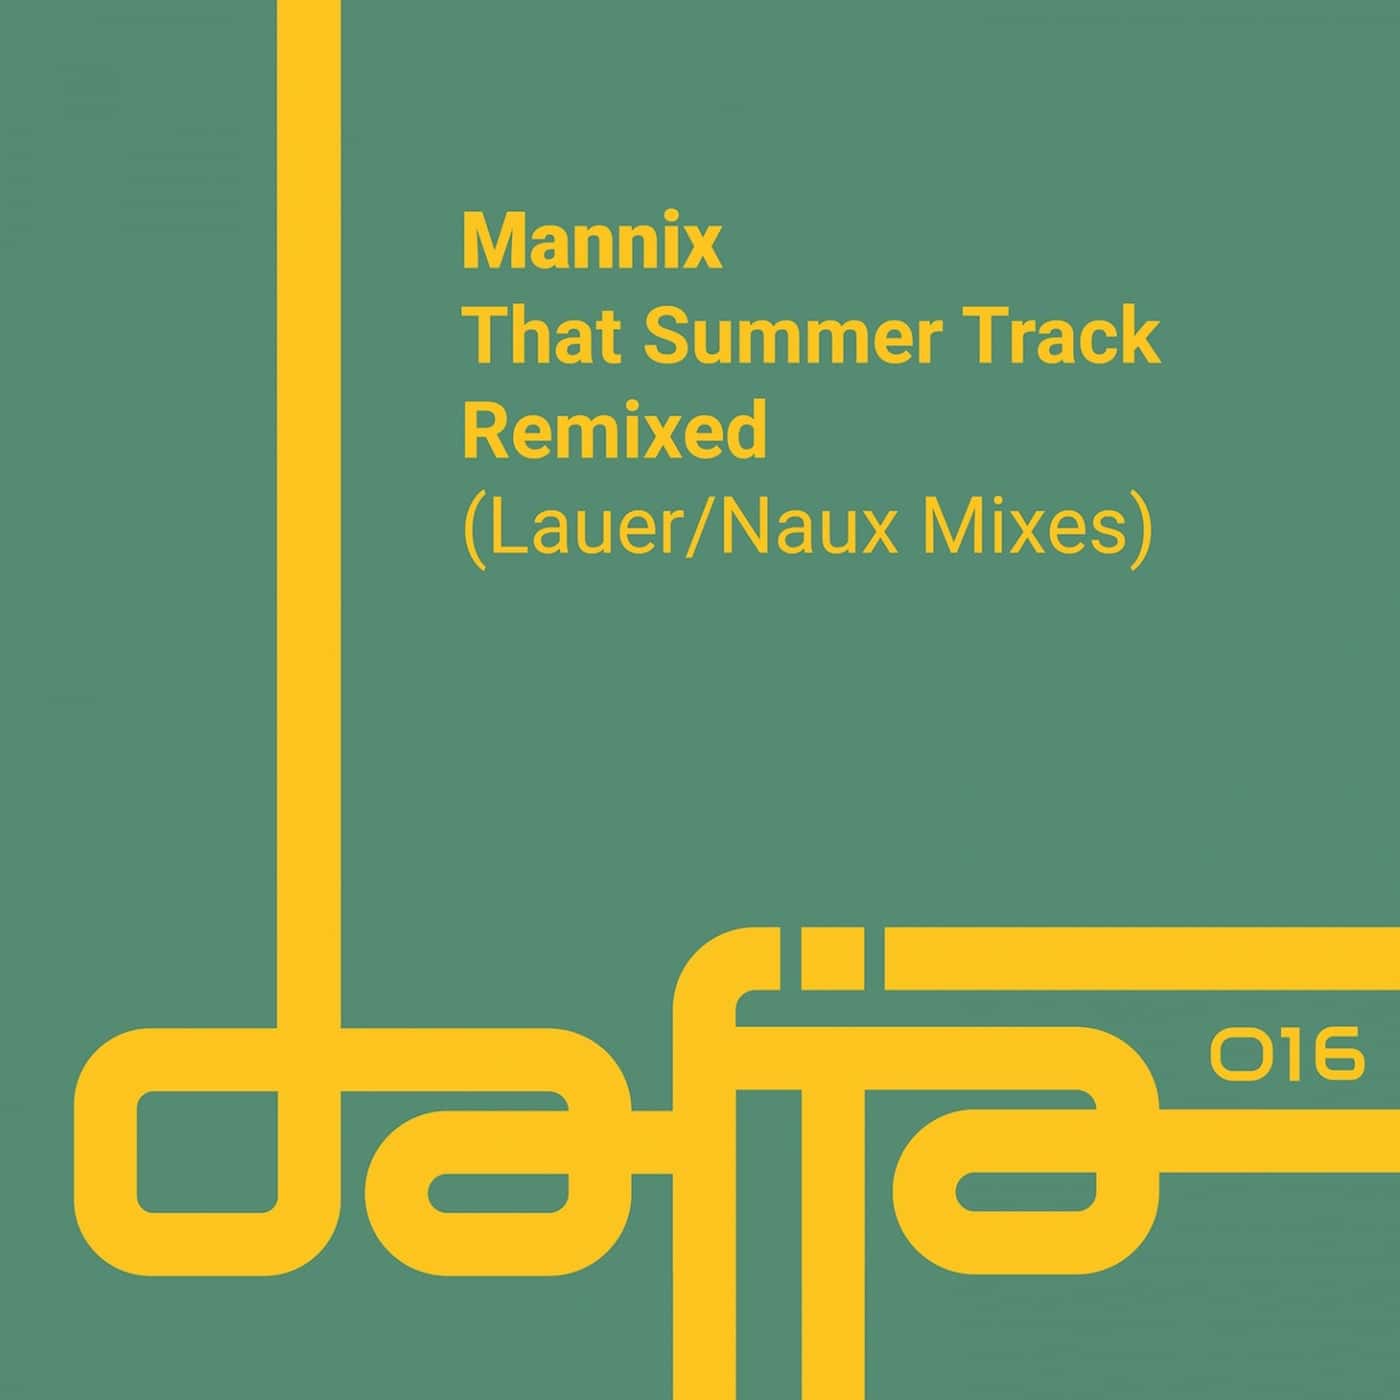 image cover: Mannix - That Summer Track (Remixed) / DAFIA016